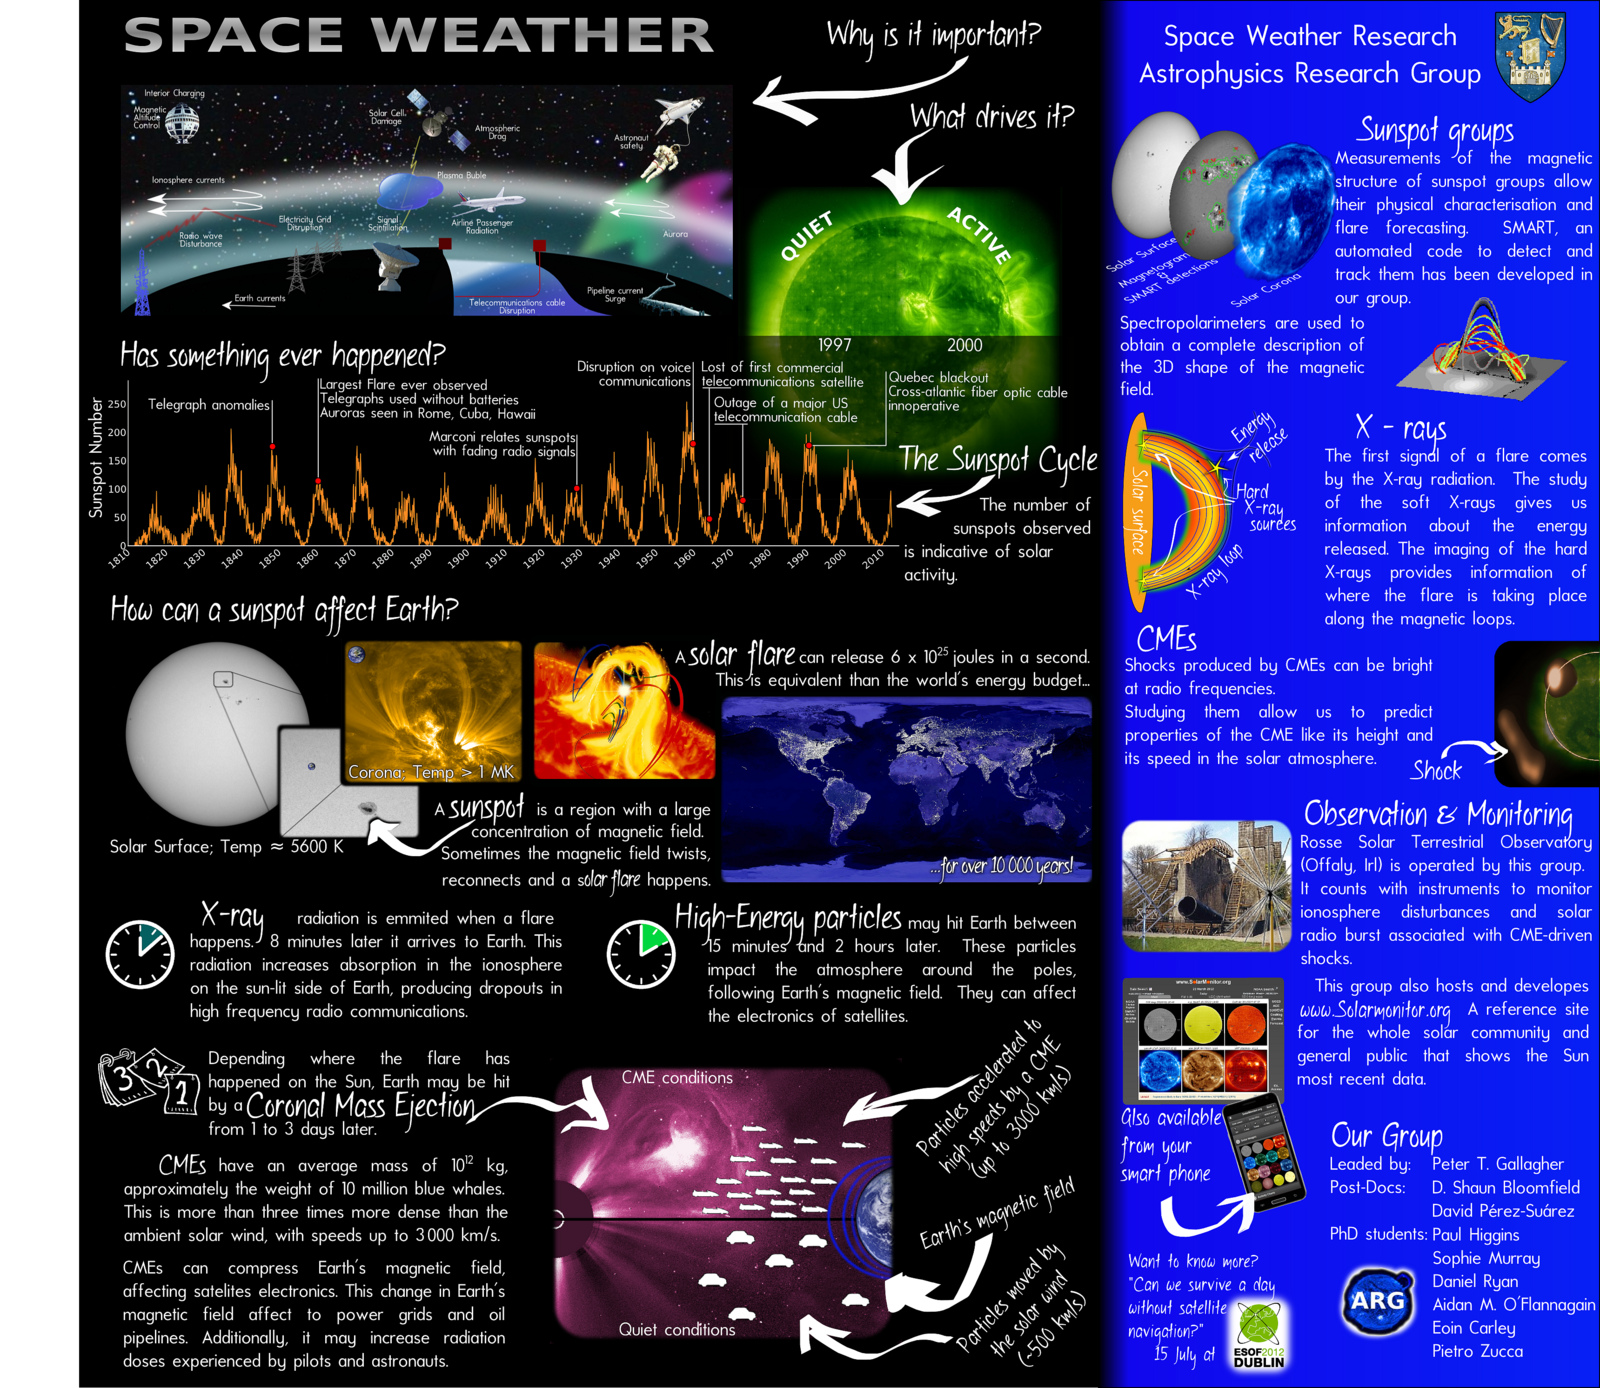 What is the Astrophysics Research Group at TCD doing to understand Space Weather?